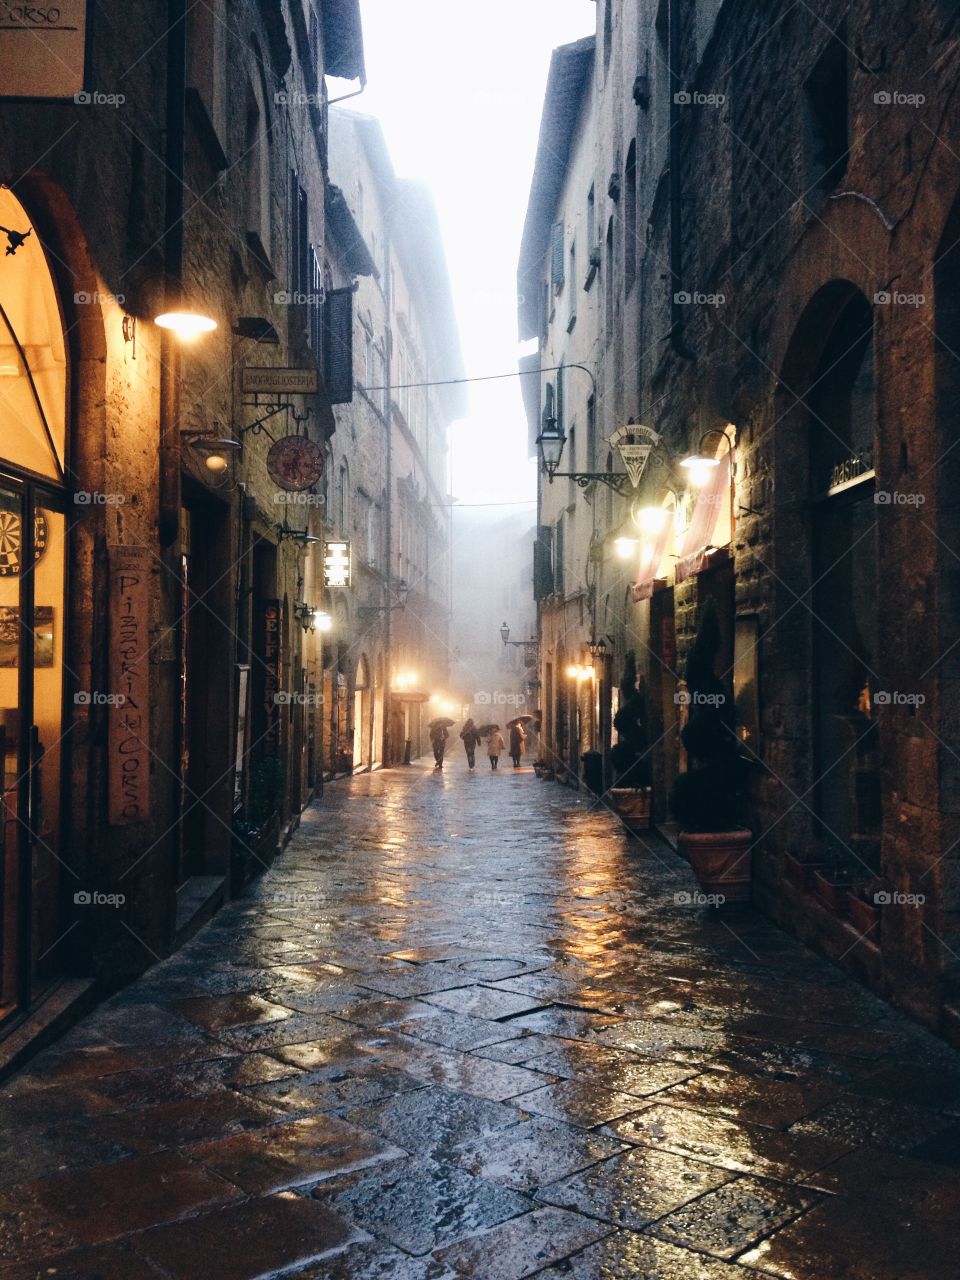 Misty and Rainy Volterra . On my trip to Italy, I've spent about 2 hours in Volterra, more than enough to fall in love with this wonderful city! 